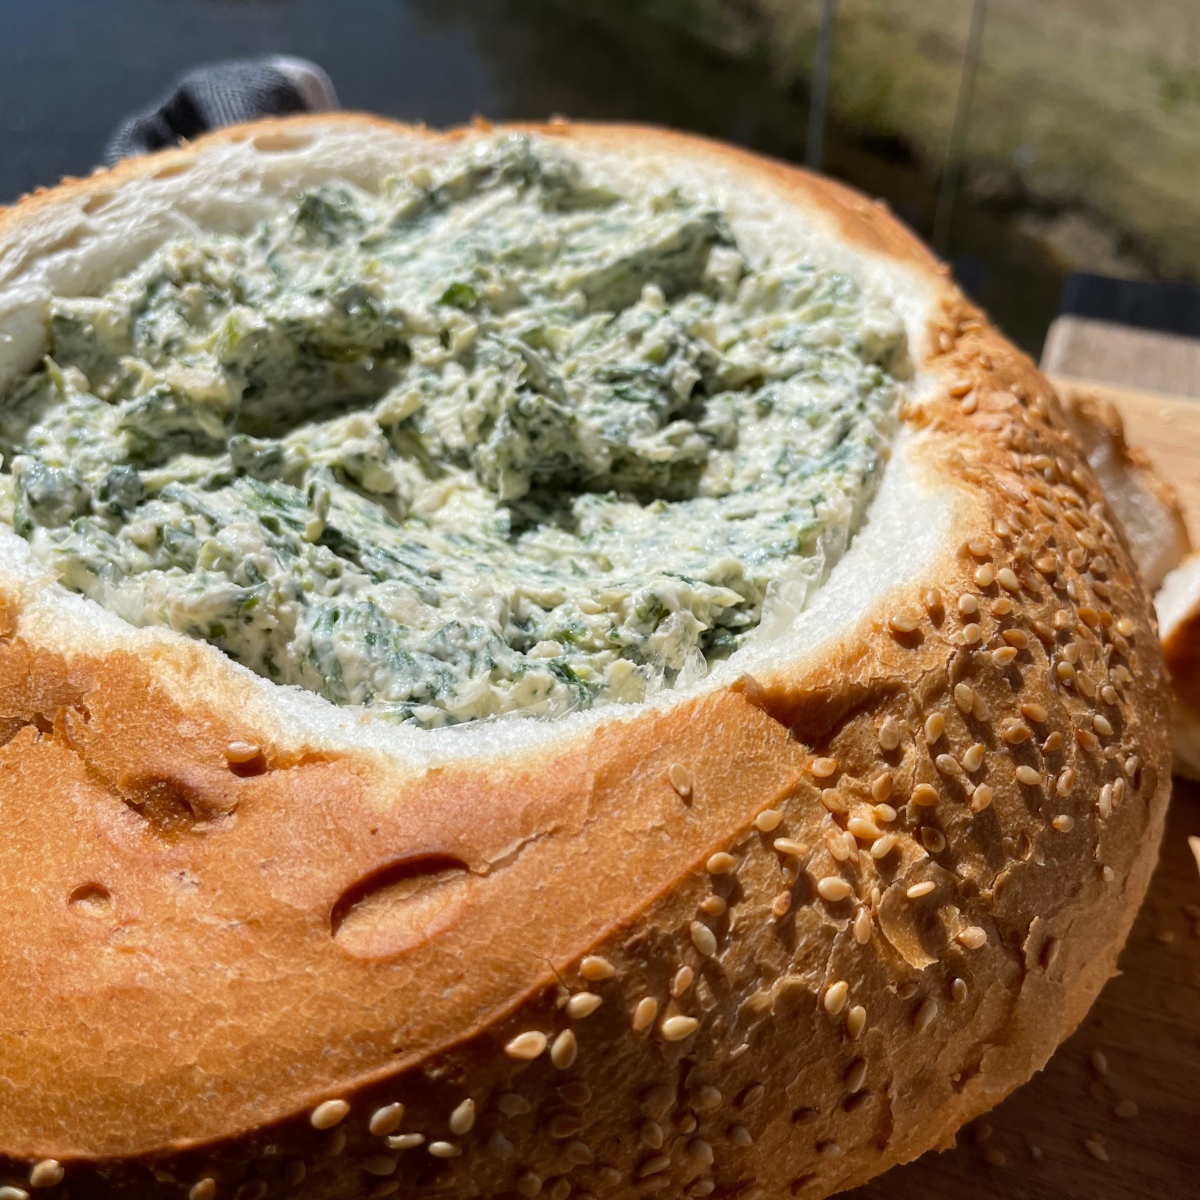 French Onion Spinach Dip ‘Cob Loaf’